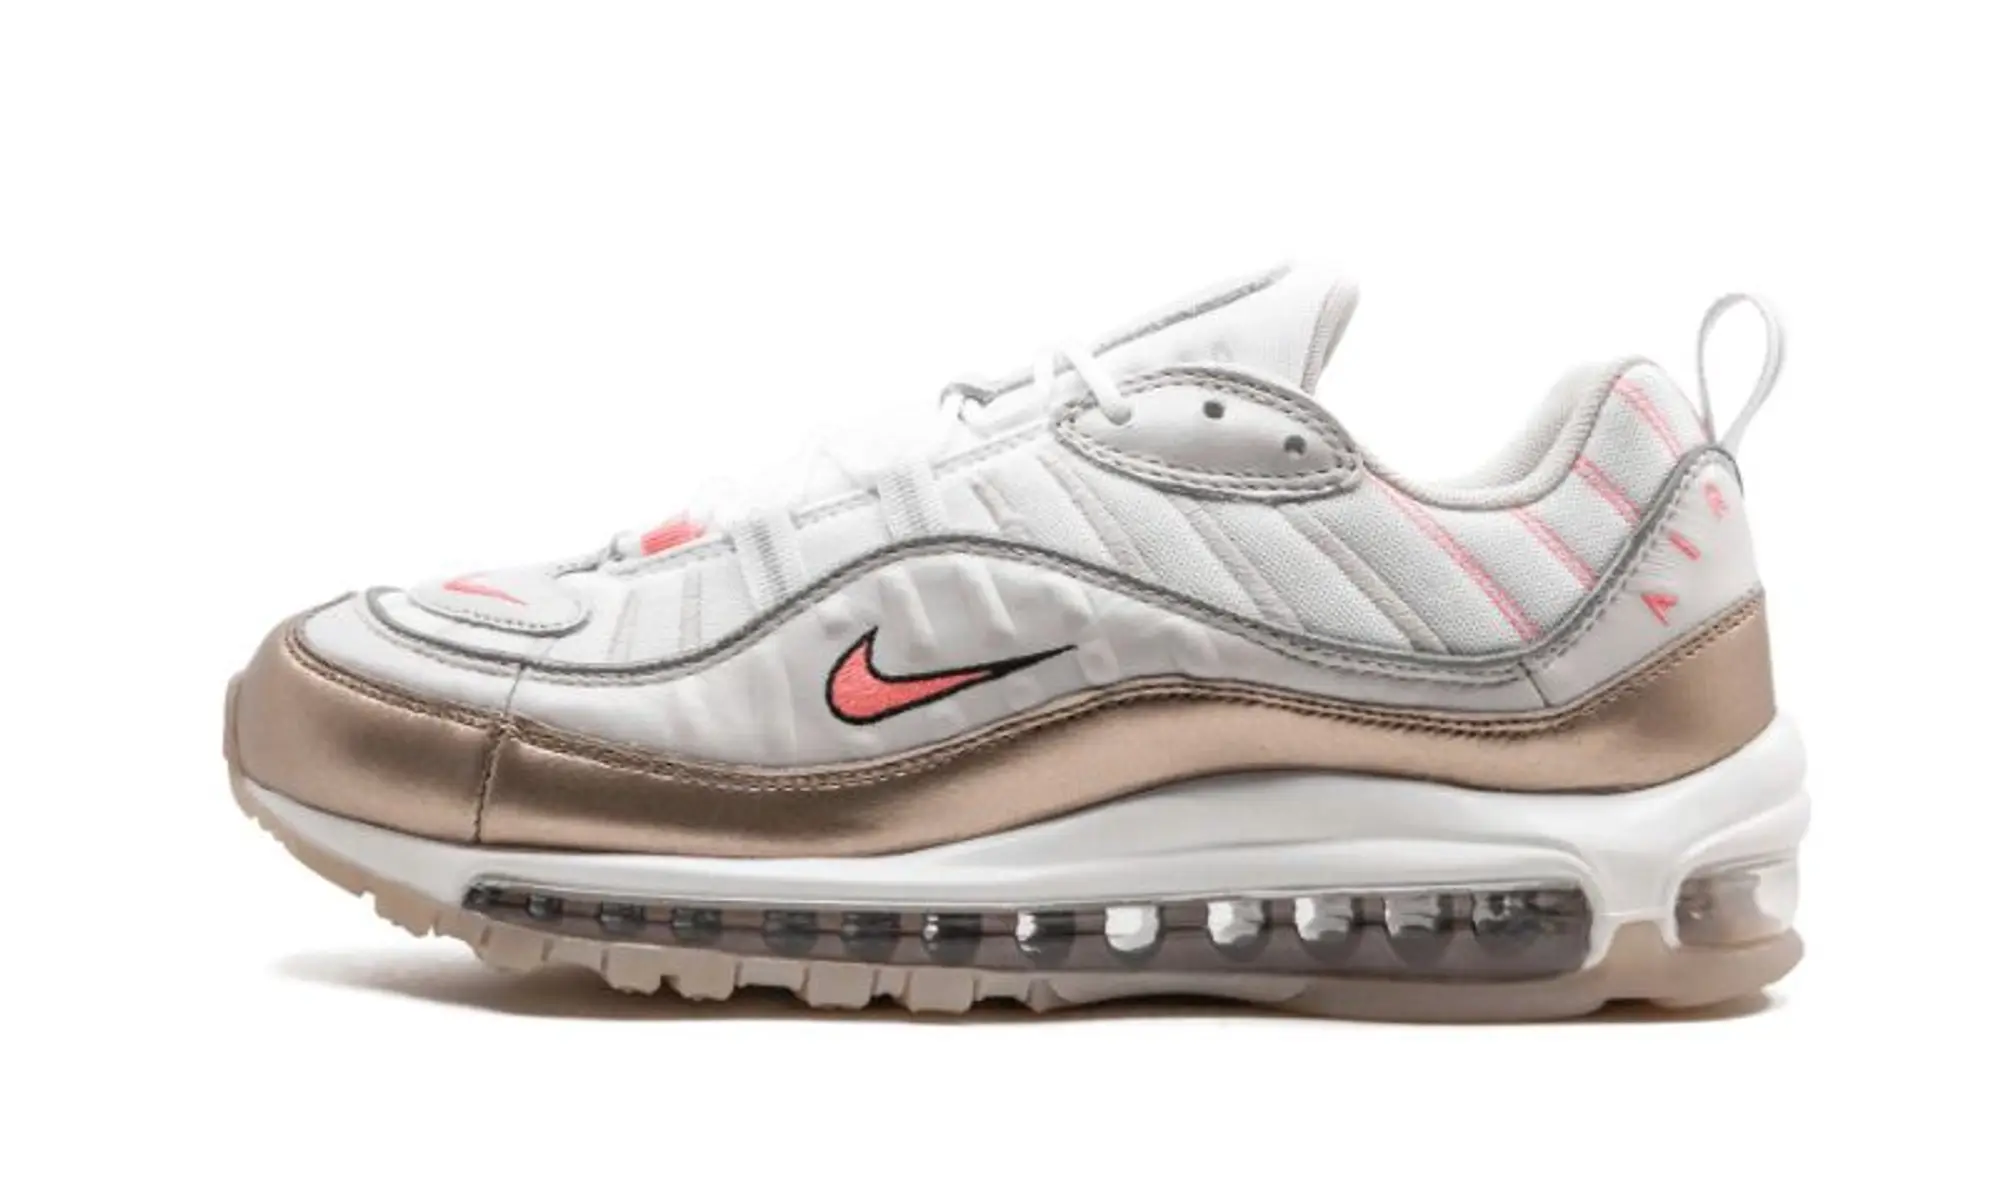 Nike Womens Air Max 98 Rose Gold Shoes